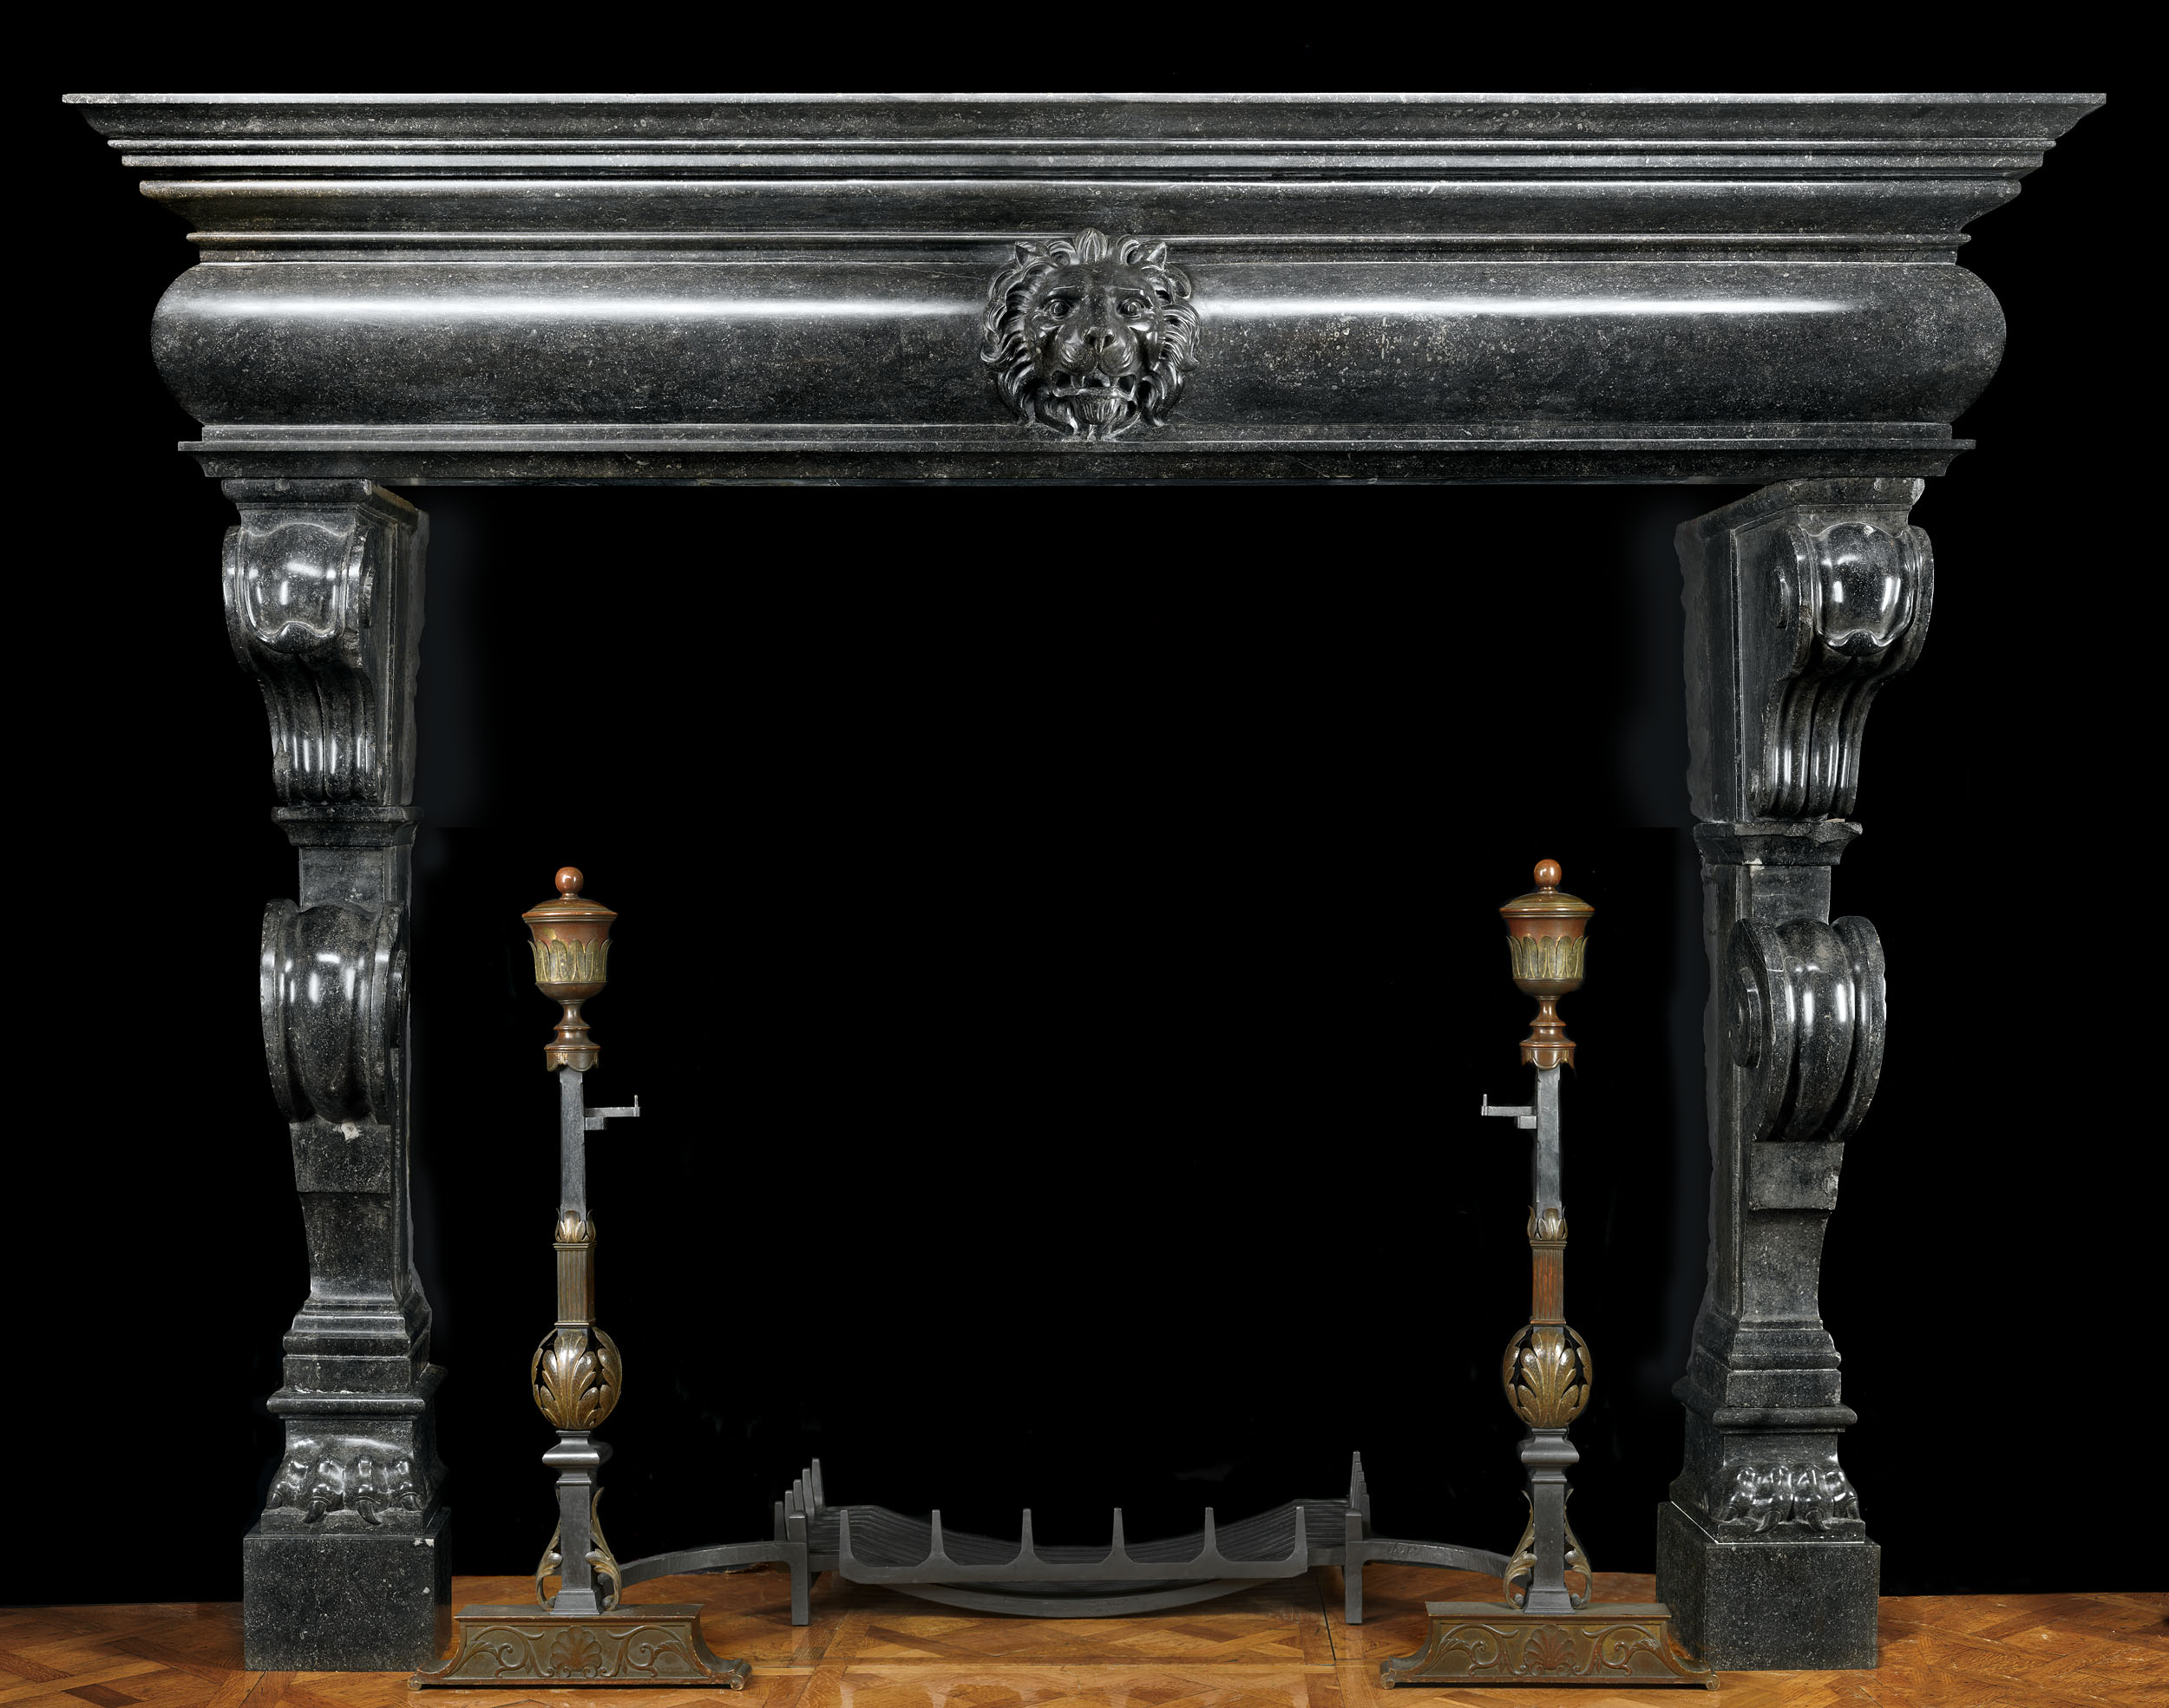 Antique Flemish dark fossil stone baroque Mannerist fireplace mantle
This grand Flemish Baroque chimneypiece has double contra scrolling tapering jambs which culminate in lion paws. These support a barrelled integral shelf and frieze which is centered by a magnificent lion's mask. 16th century and later.